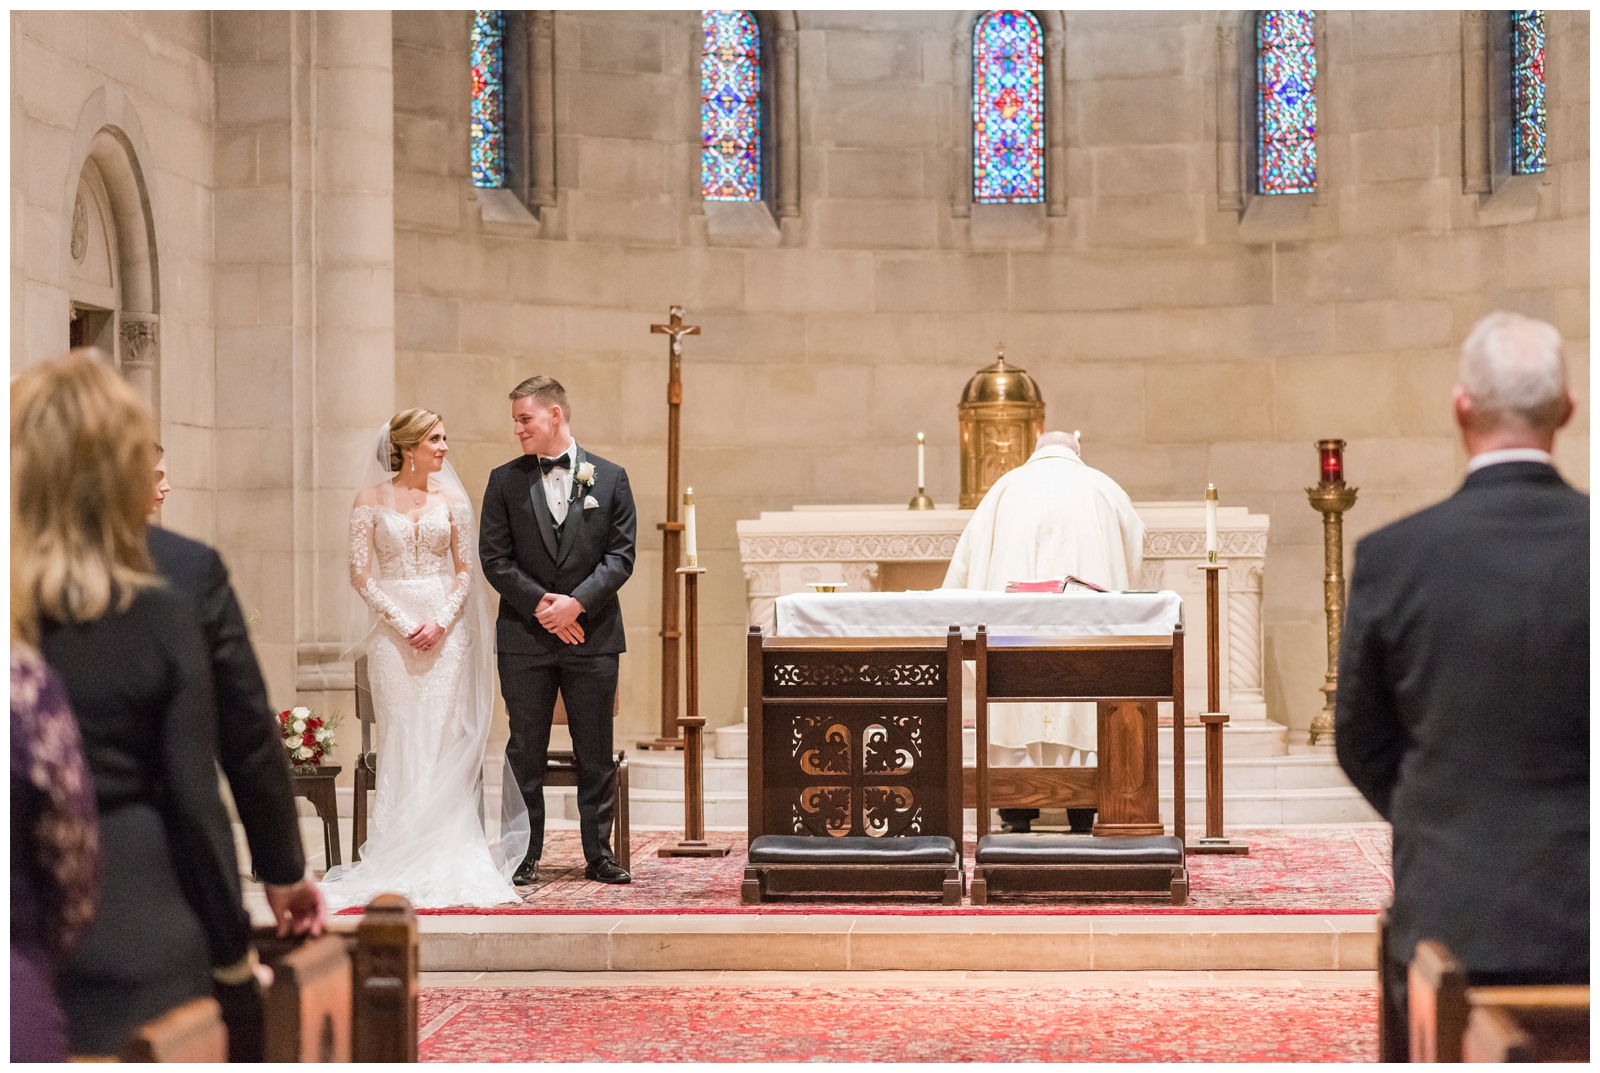 traditional wedding ceremony in church at St. Charles Preparatory School